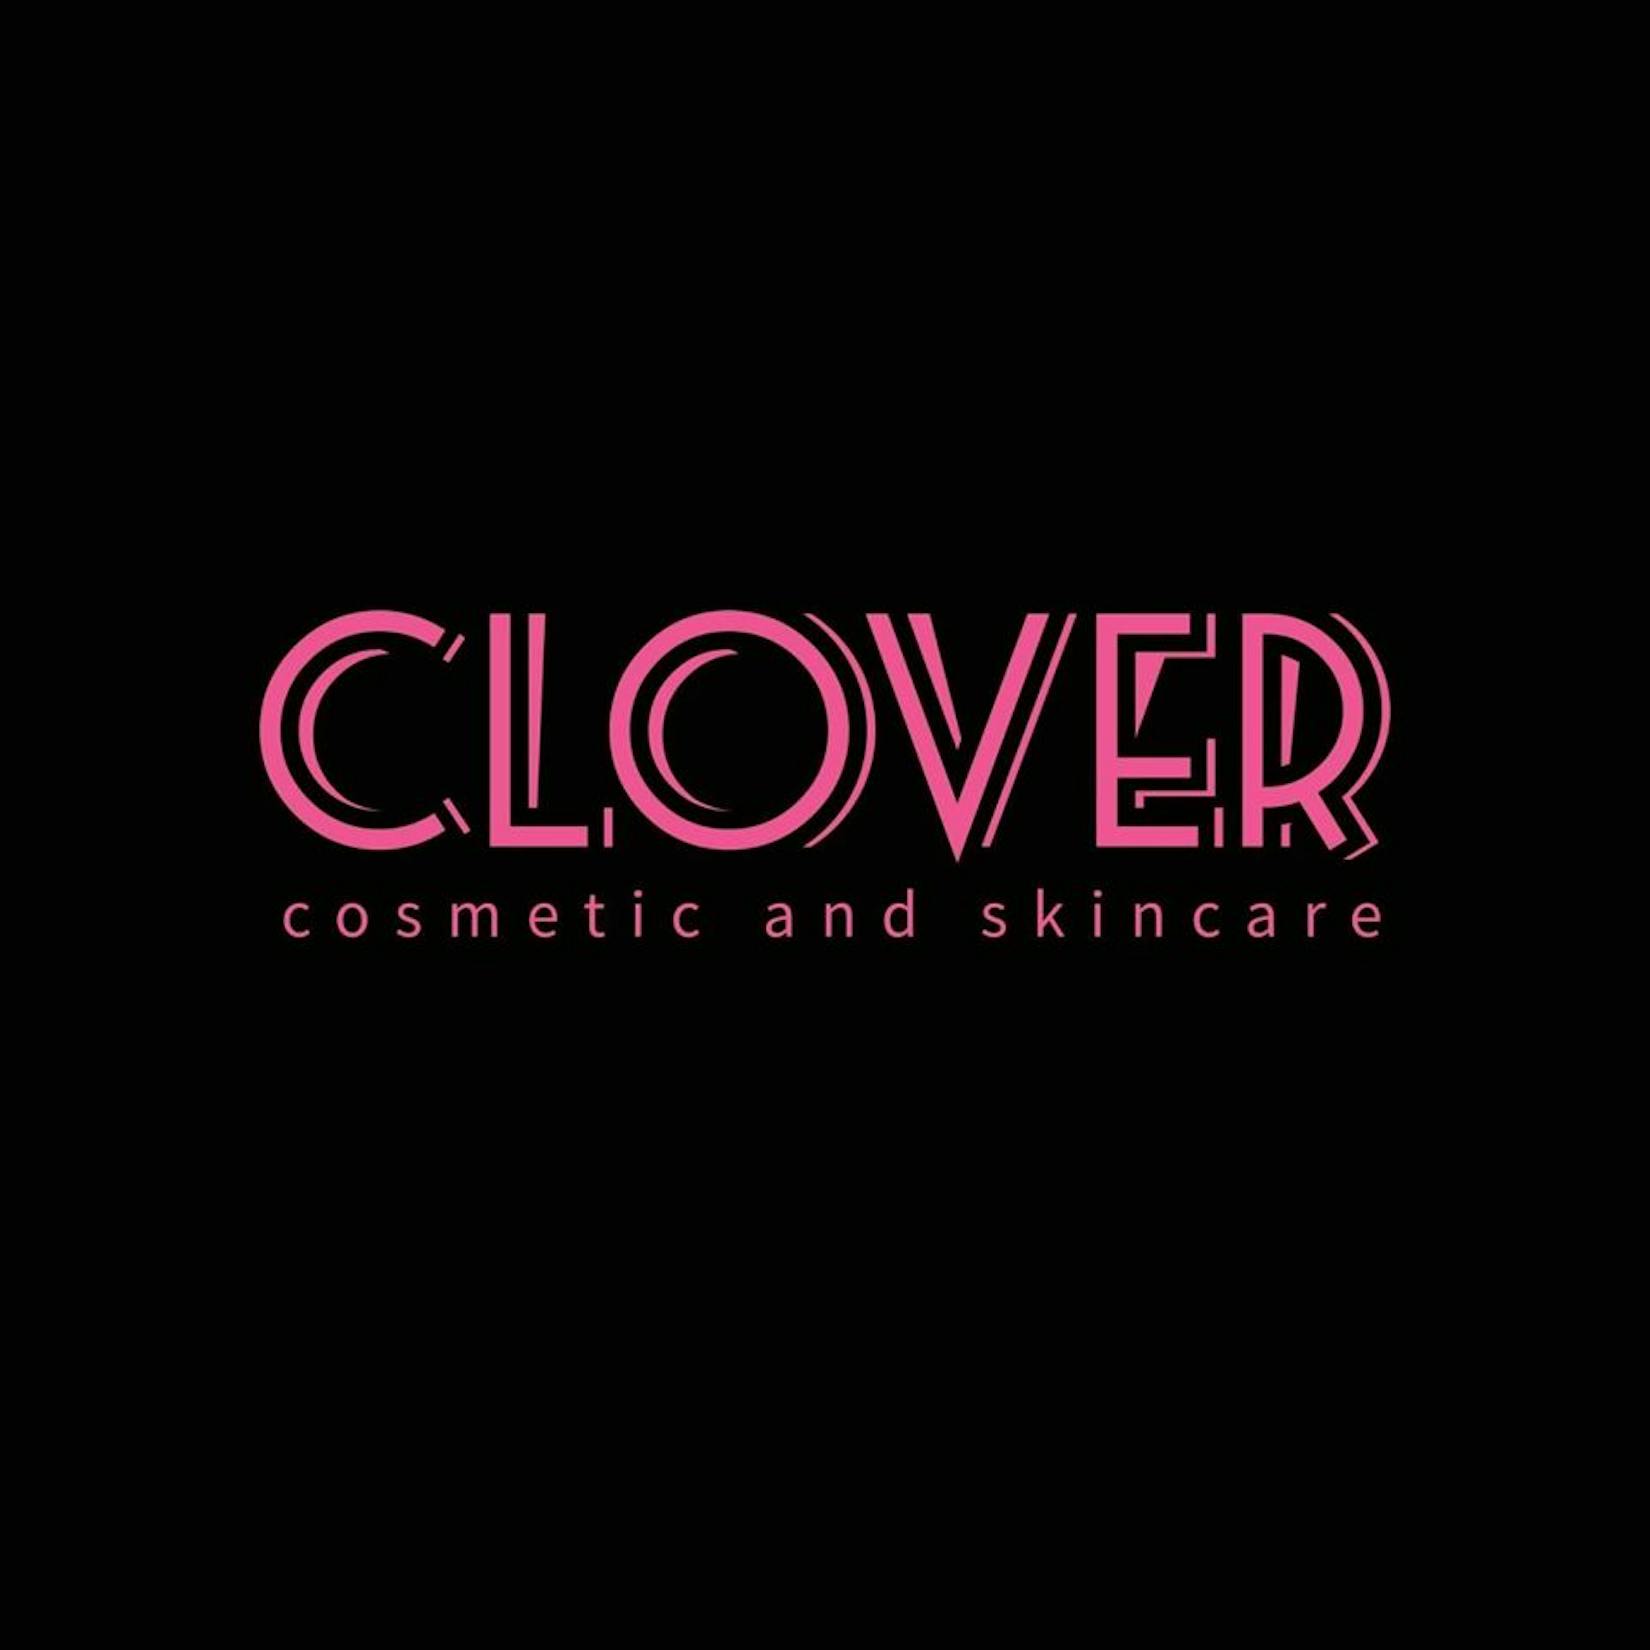 Clover Cosmetics and Skin Care ( Tamwe Ocean) | Beauty